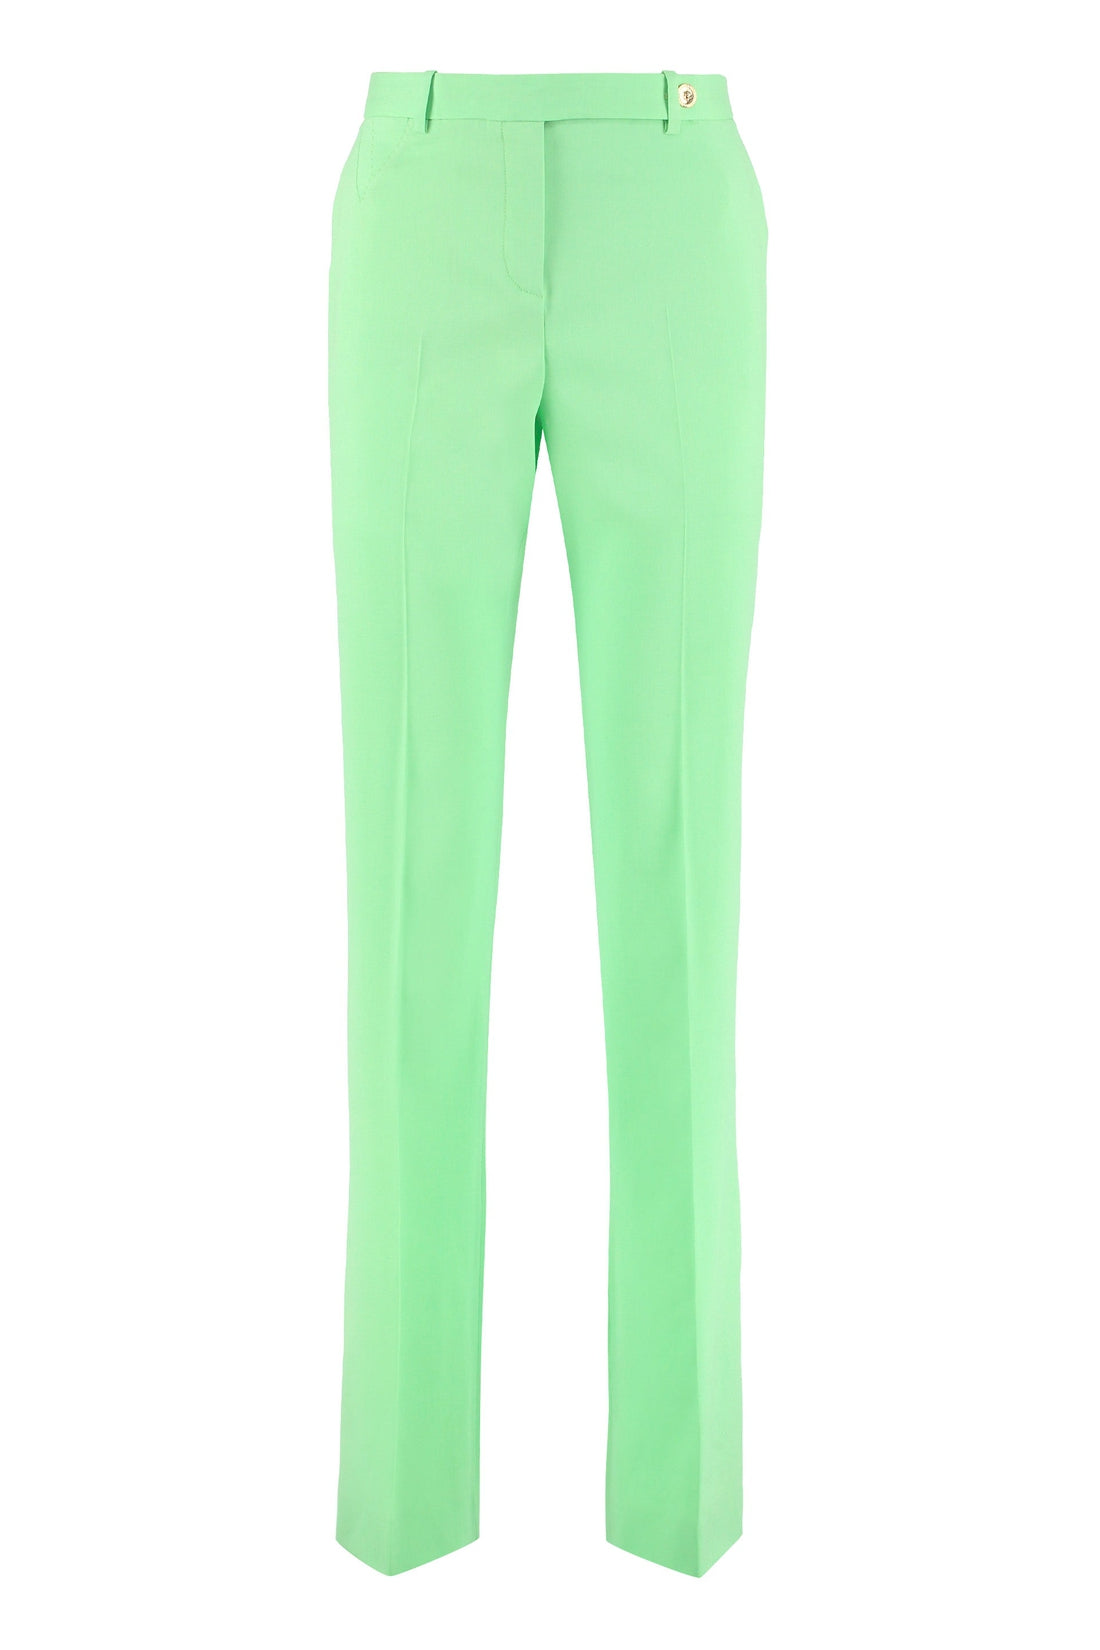 Versace-OUTLET-SALE-Tailored wool trousers-ARCHIVIST